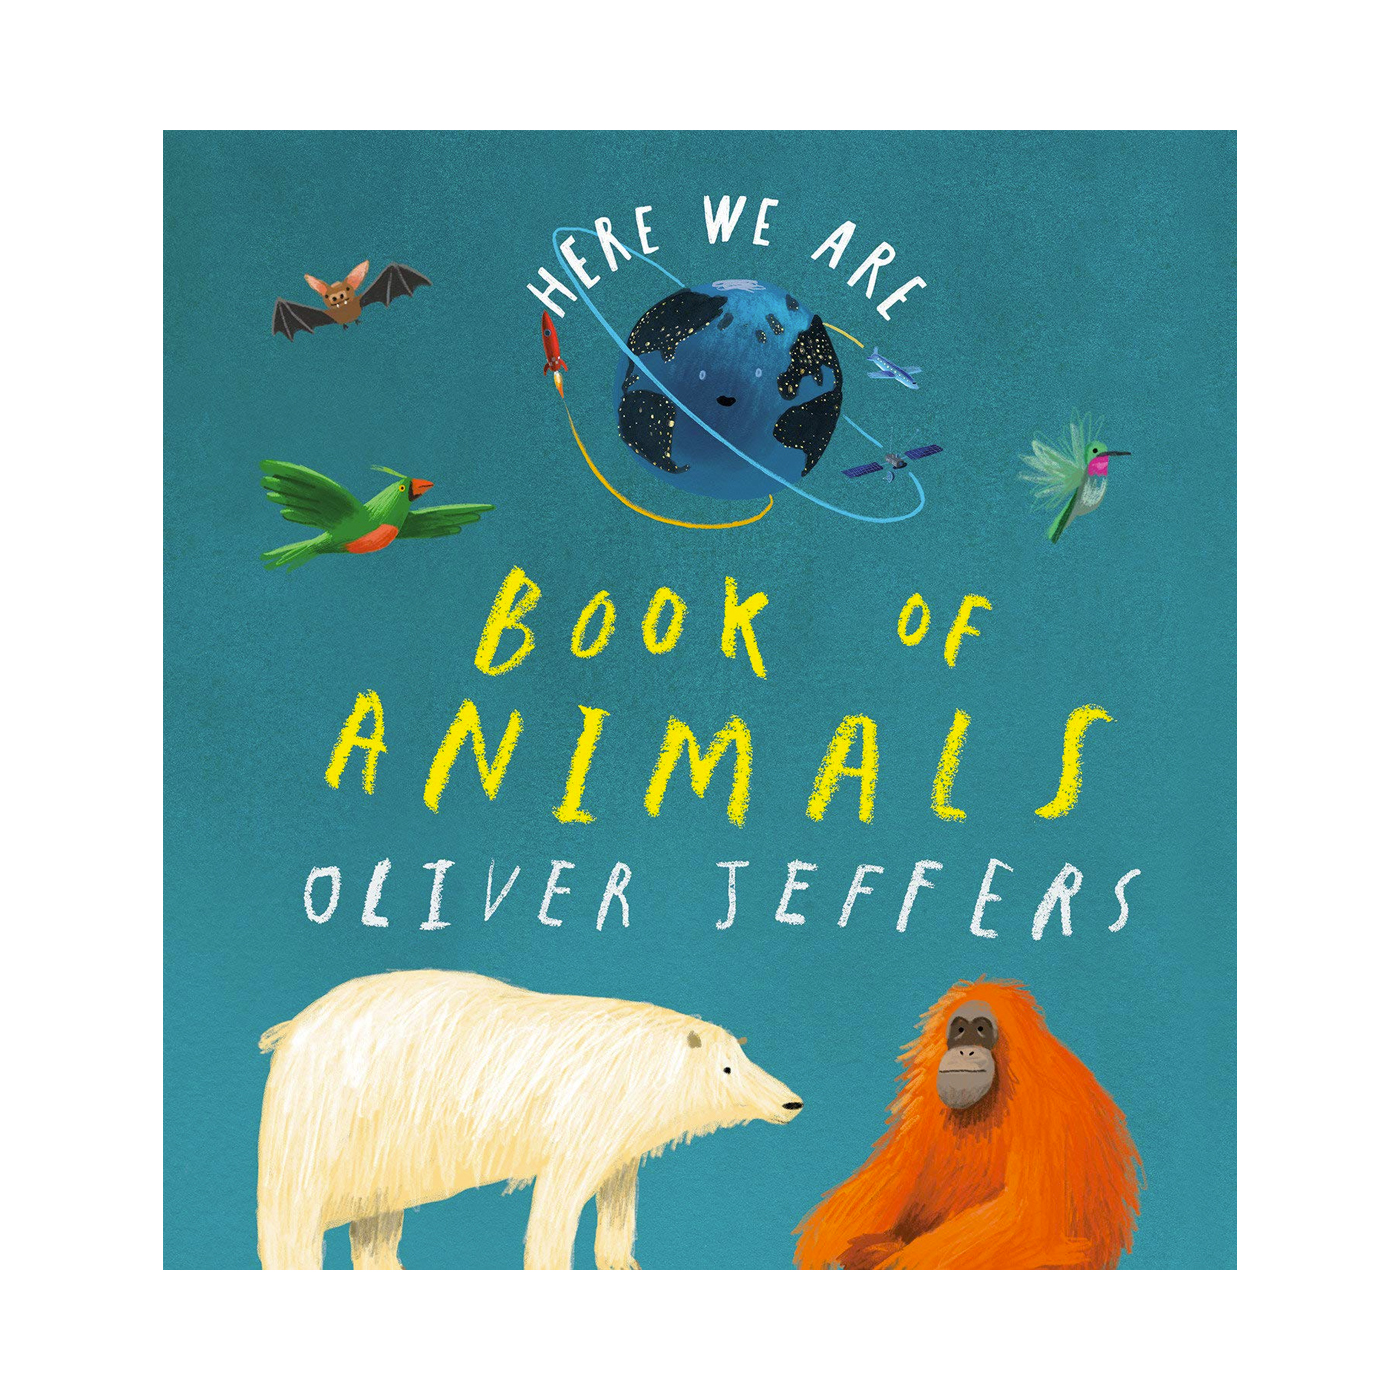  Here We Are - Book of Animals